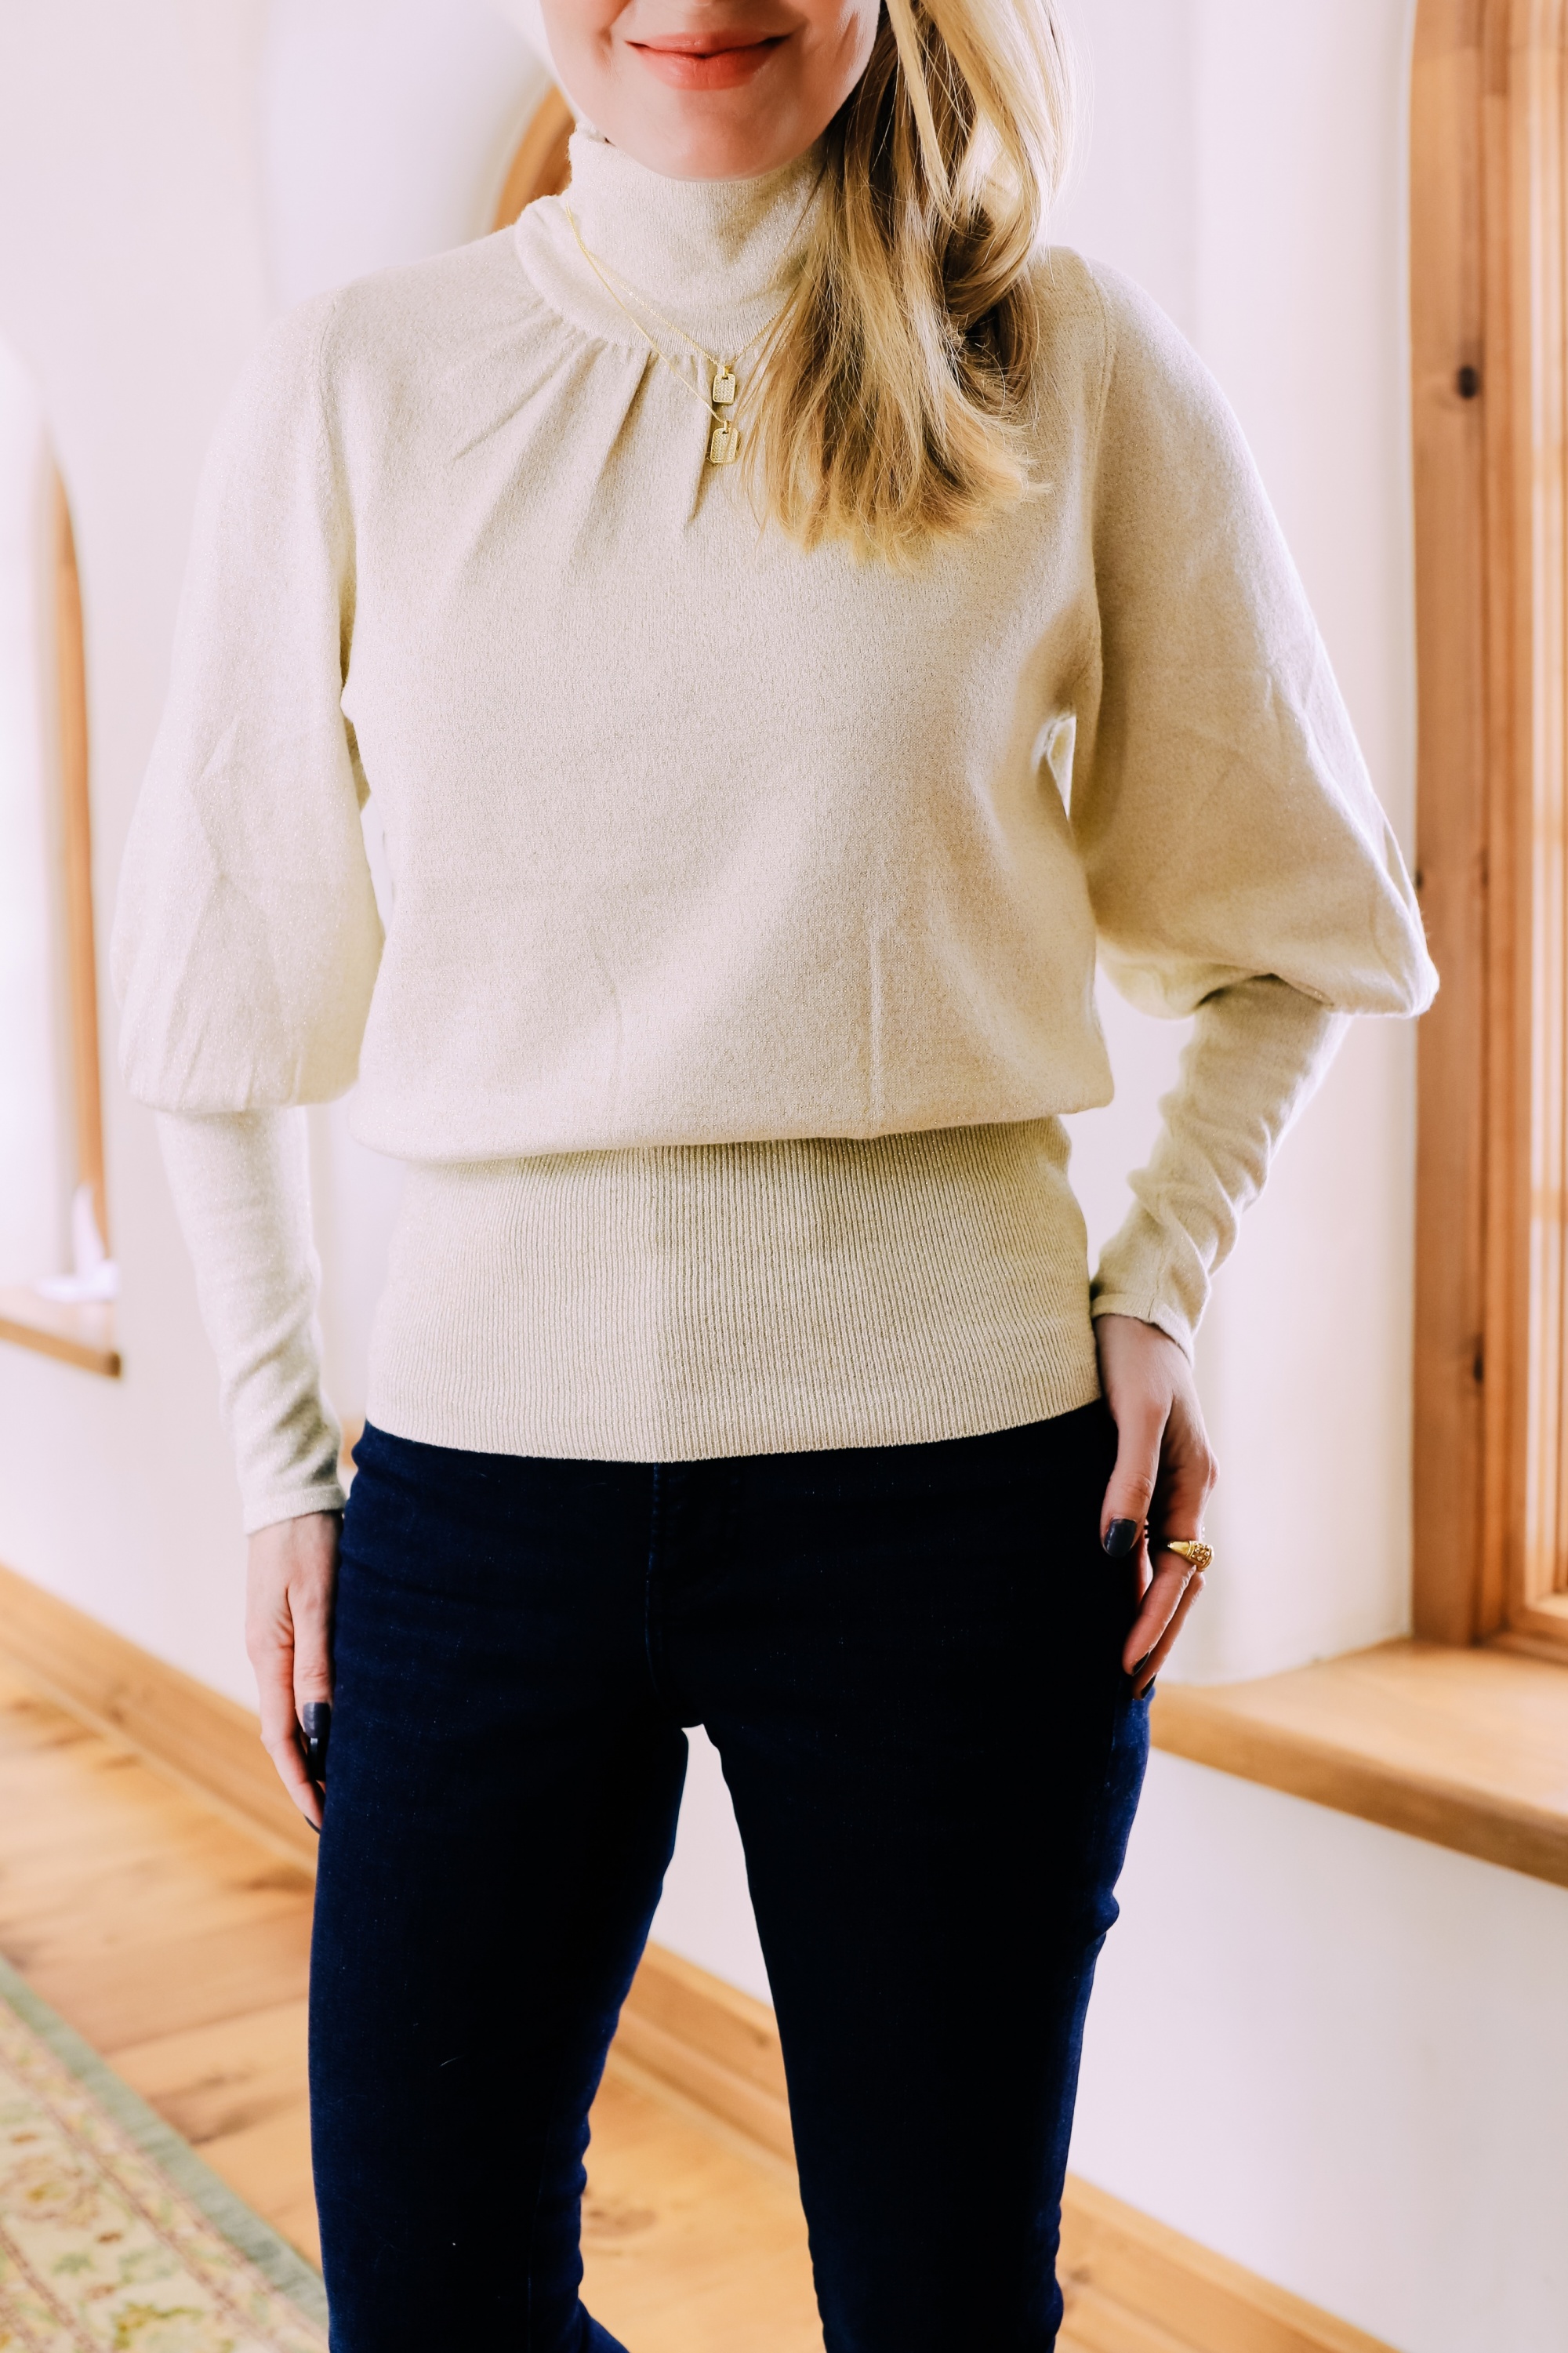 Black Friday Doorbuster, Erin Busbee of Busbee Style wearing a metallic blouson sleeve turtleneck sweater, raw step hem jeans, pave layered dog tag necklace, and cozy socks from Express in Telluride, Colorado